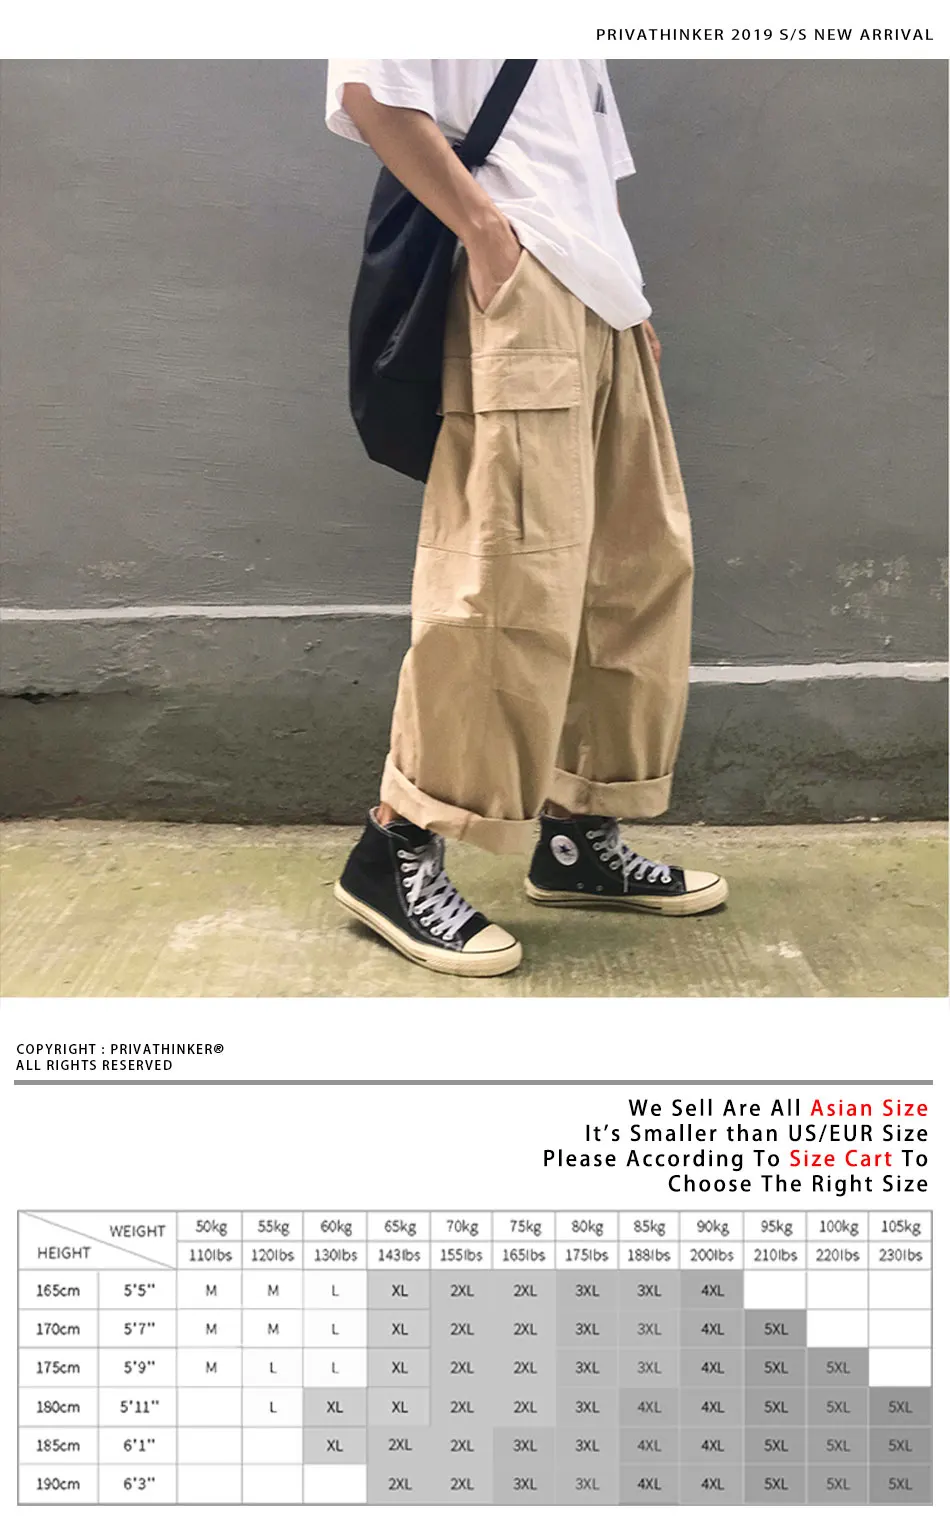 Privathinker Summer Casual Pant Mens Sweatpants Streetwear New Fashion Baggy Cargo Pants Elasticity Joggers Trousers